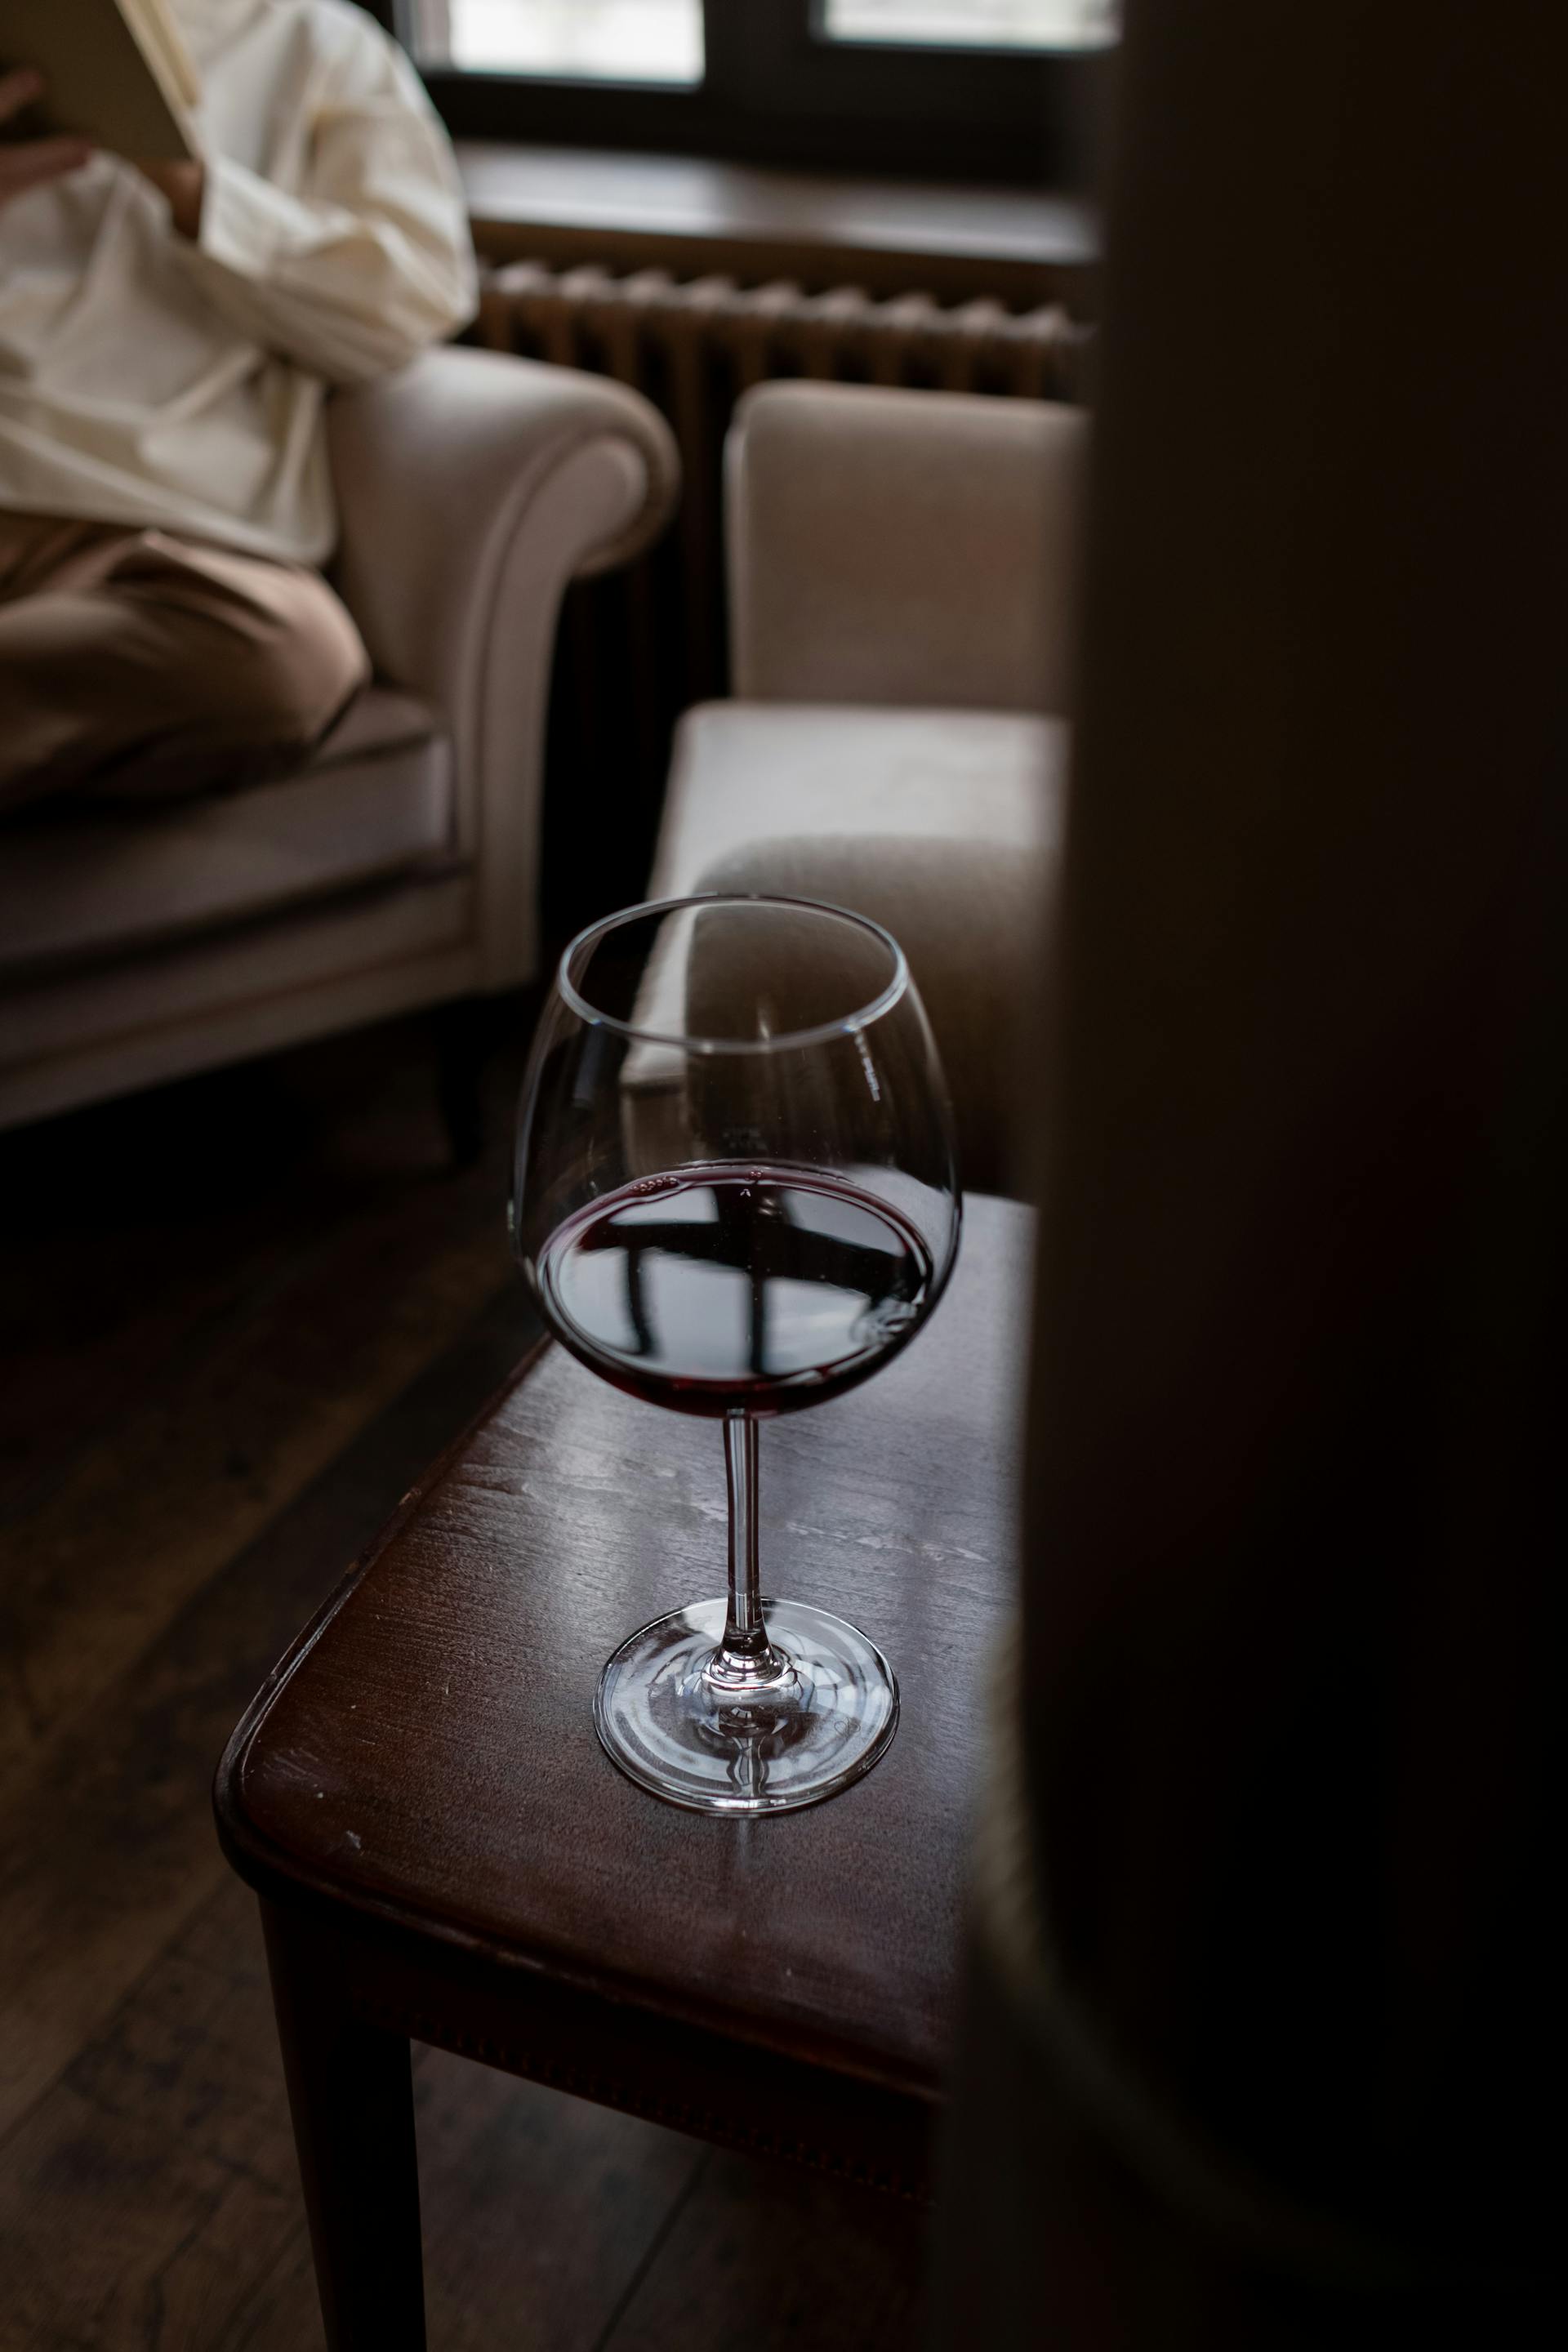 A glass of wine on a table | Source: Pexels